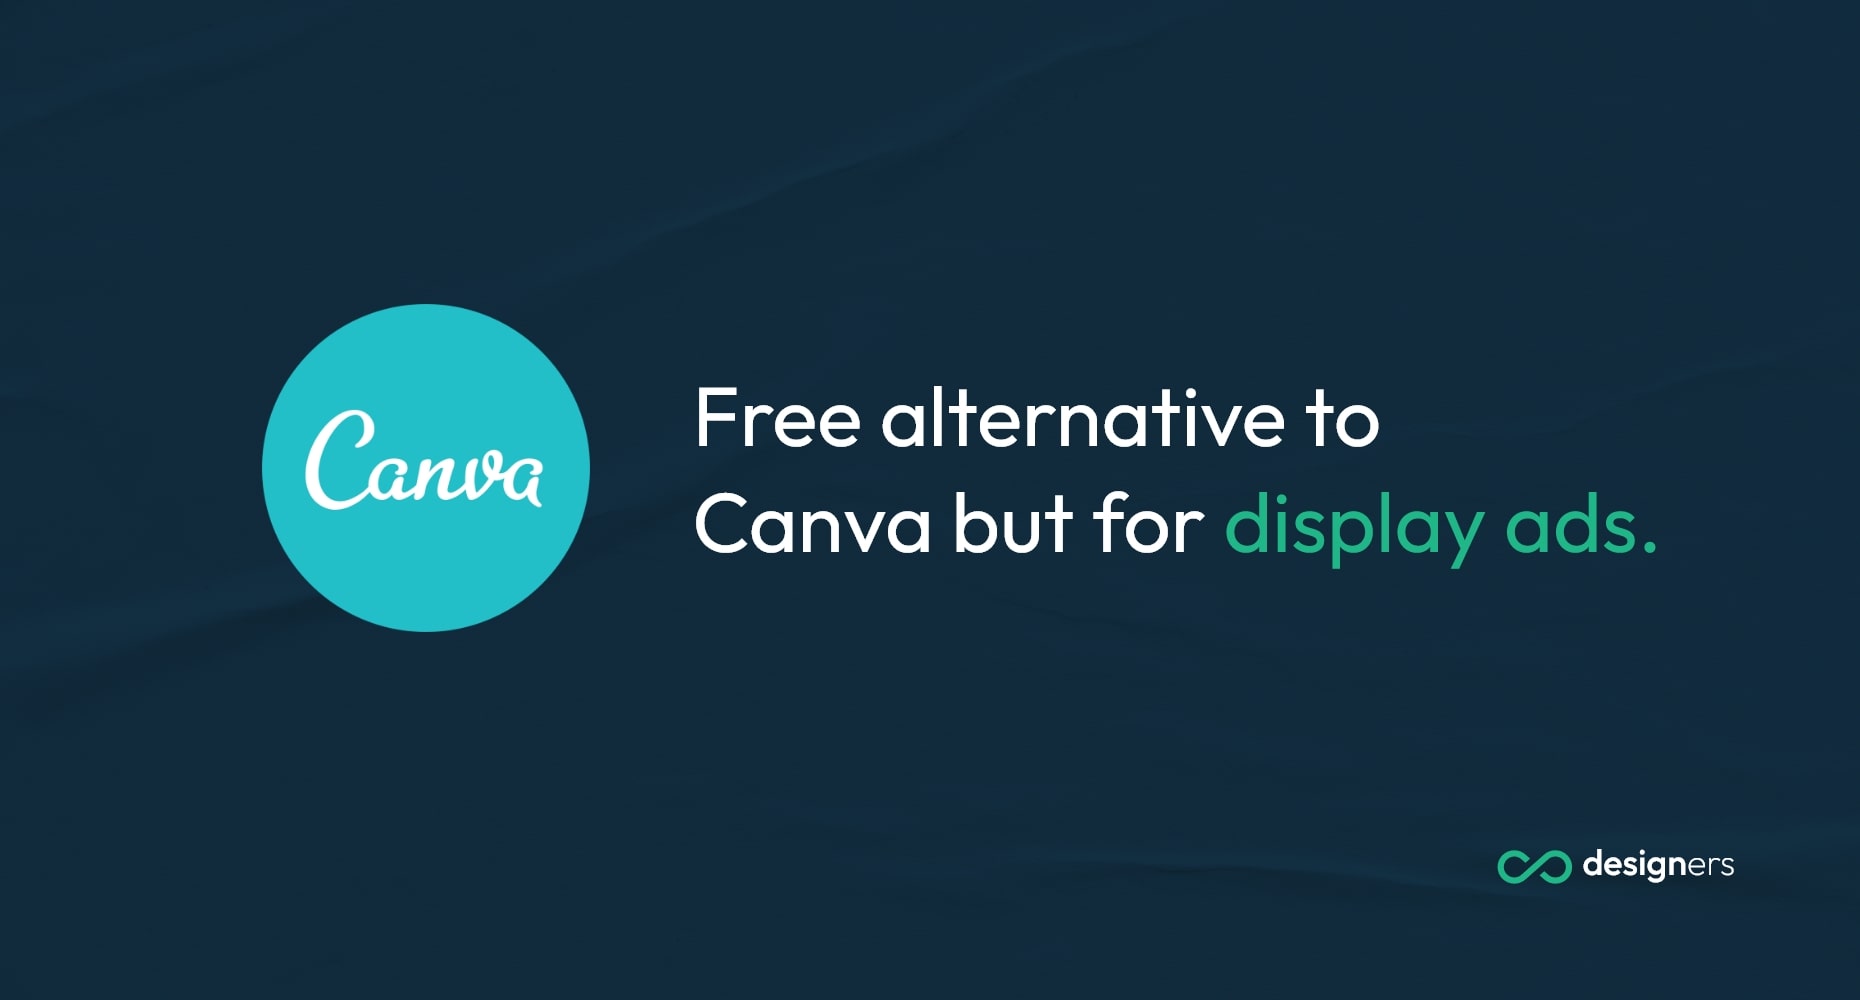 Free alternative to Canva but for display ads